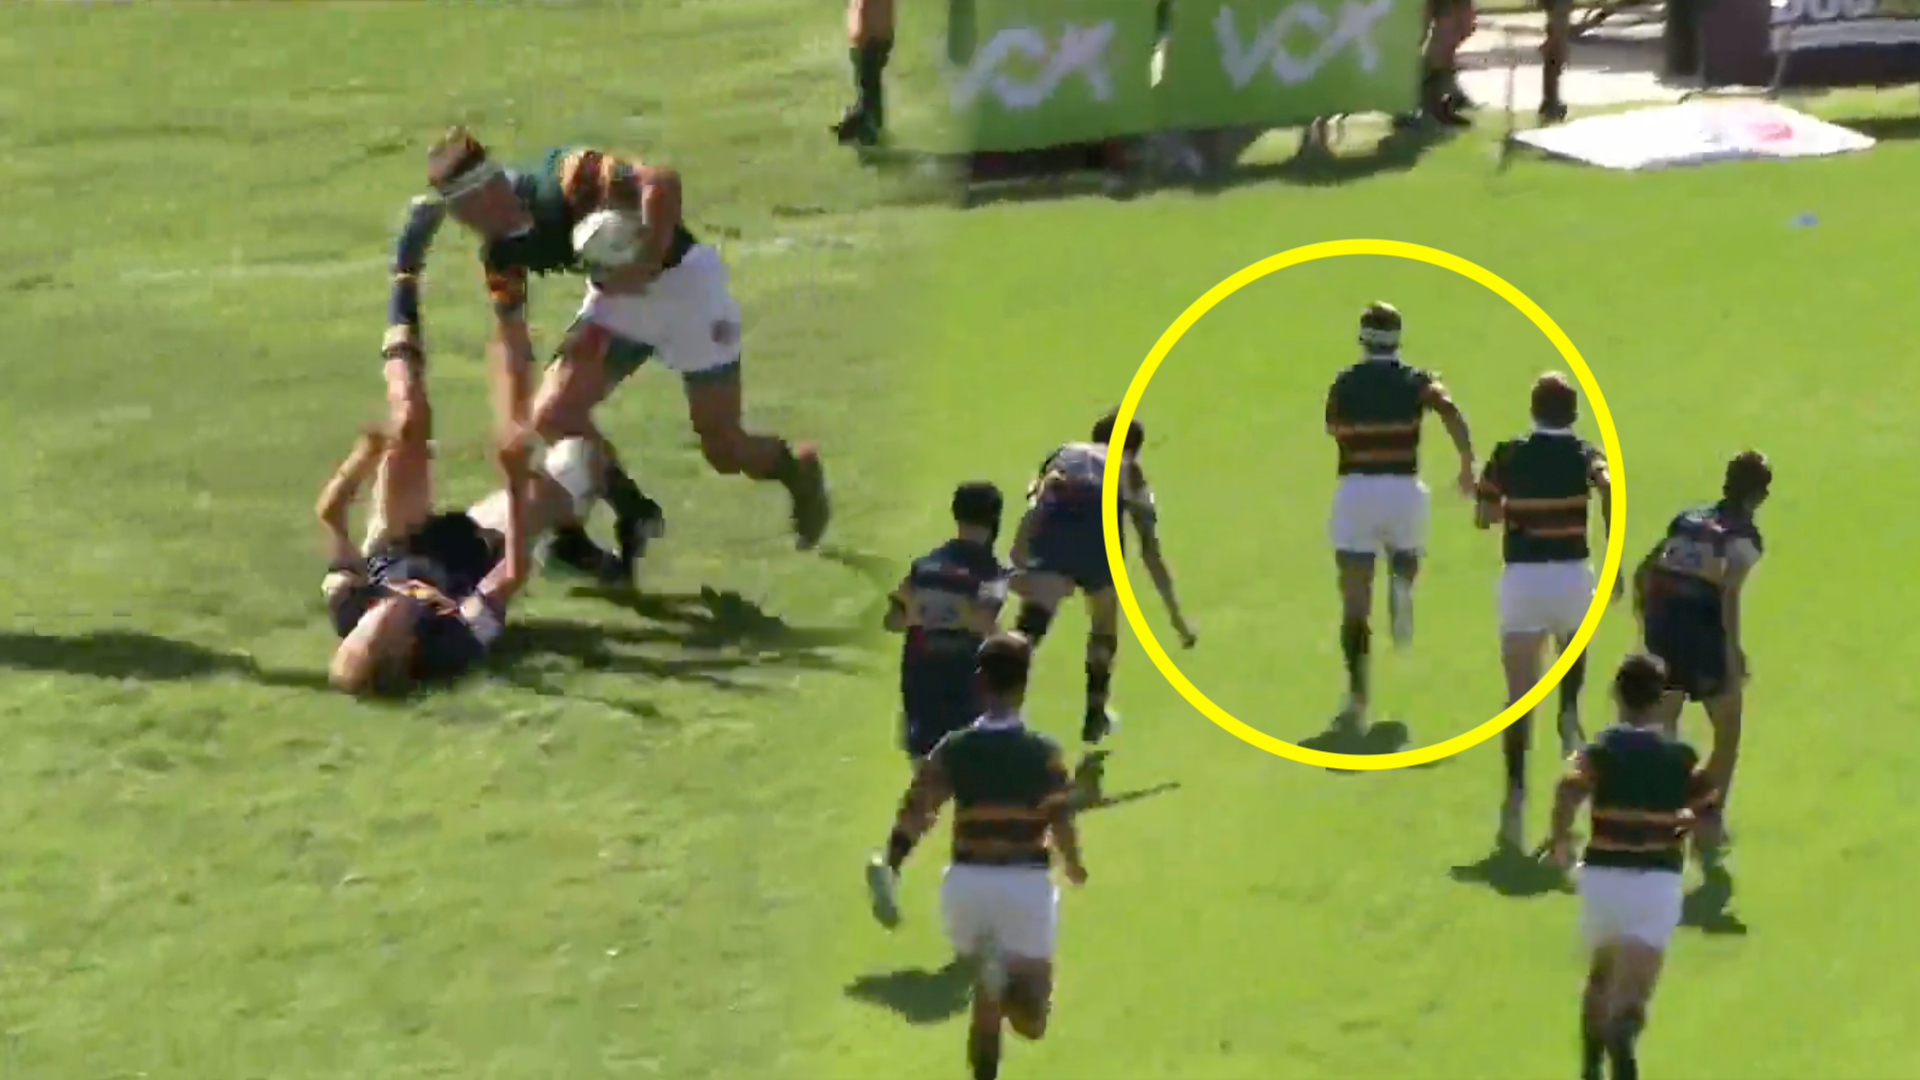 South African 15-year-old enters full beast mode on way to try line